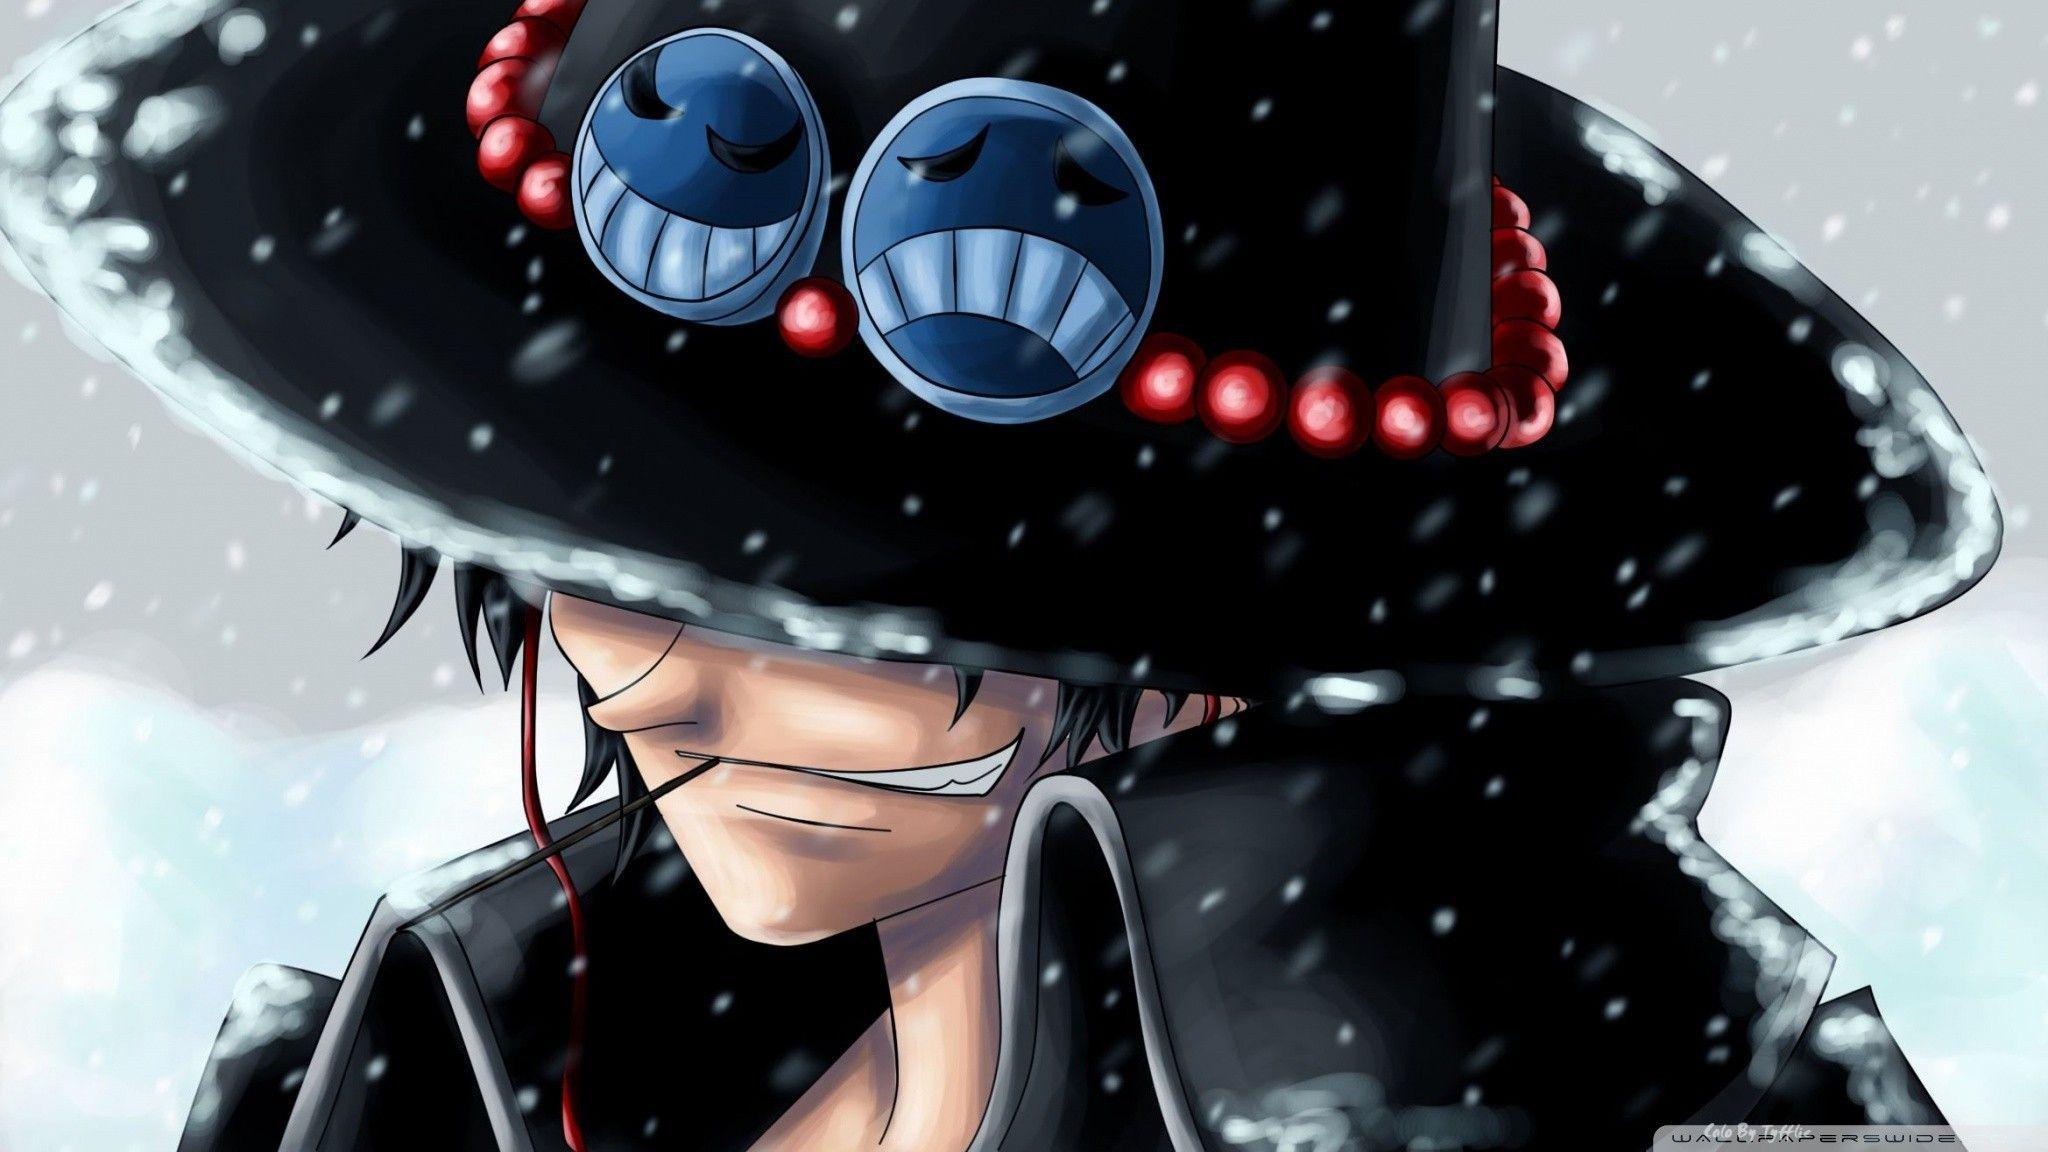 Wallpaper For > One Piece New World Wallpaper Ace